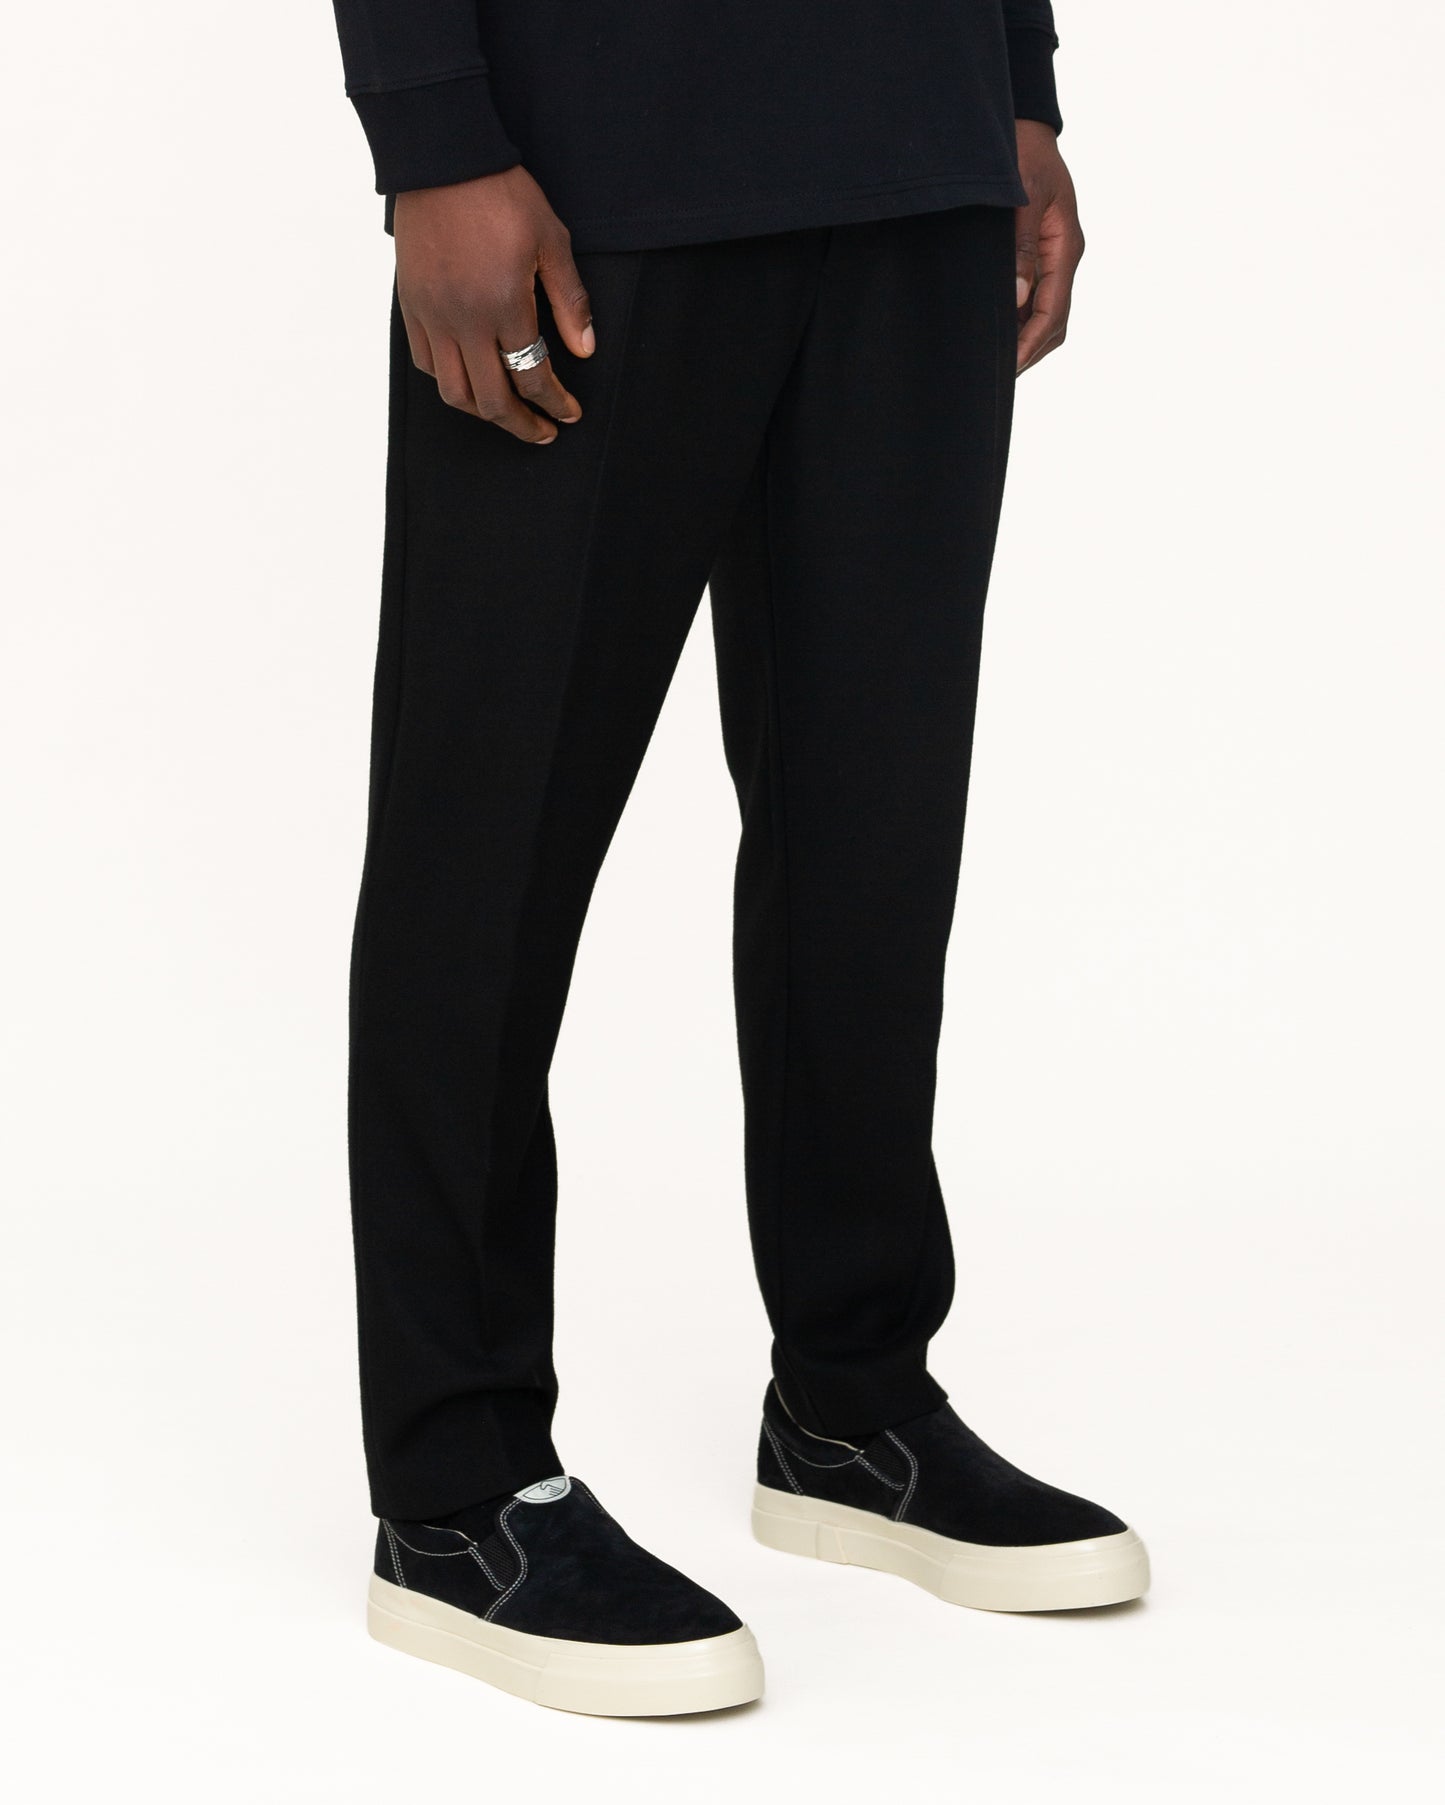 mens trousers, black trousers, front angle side